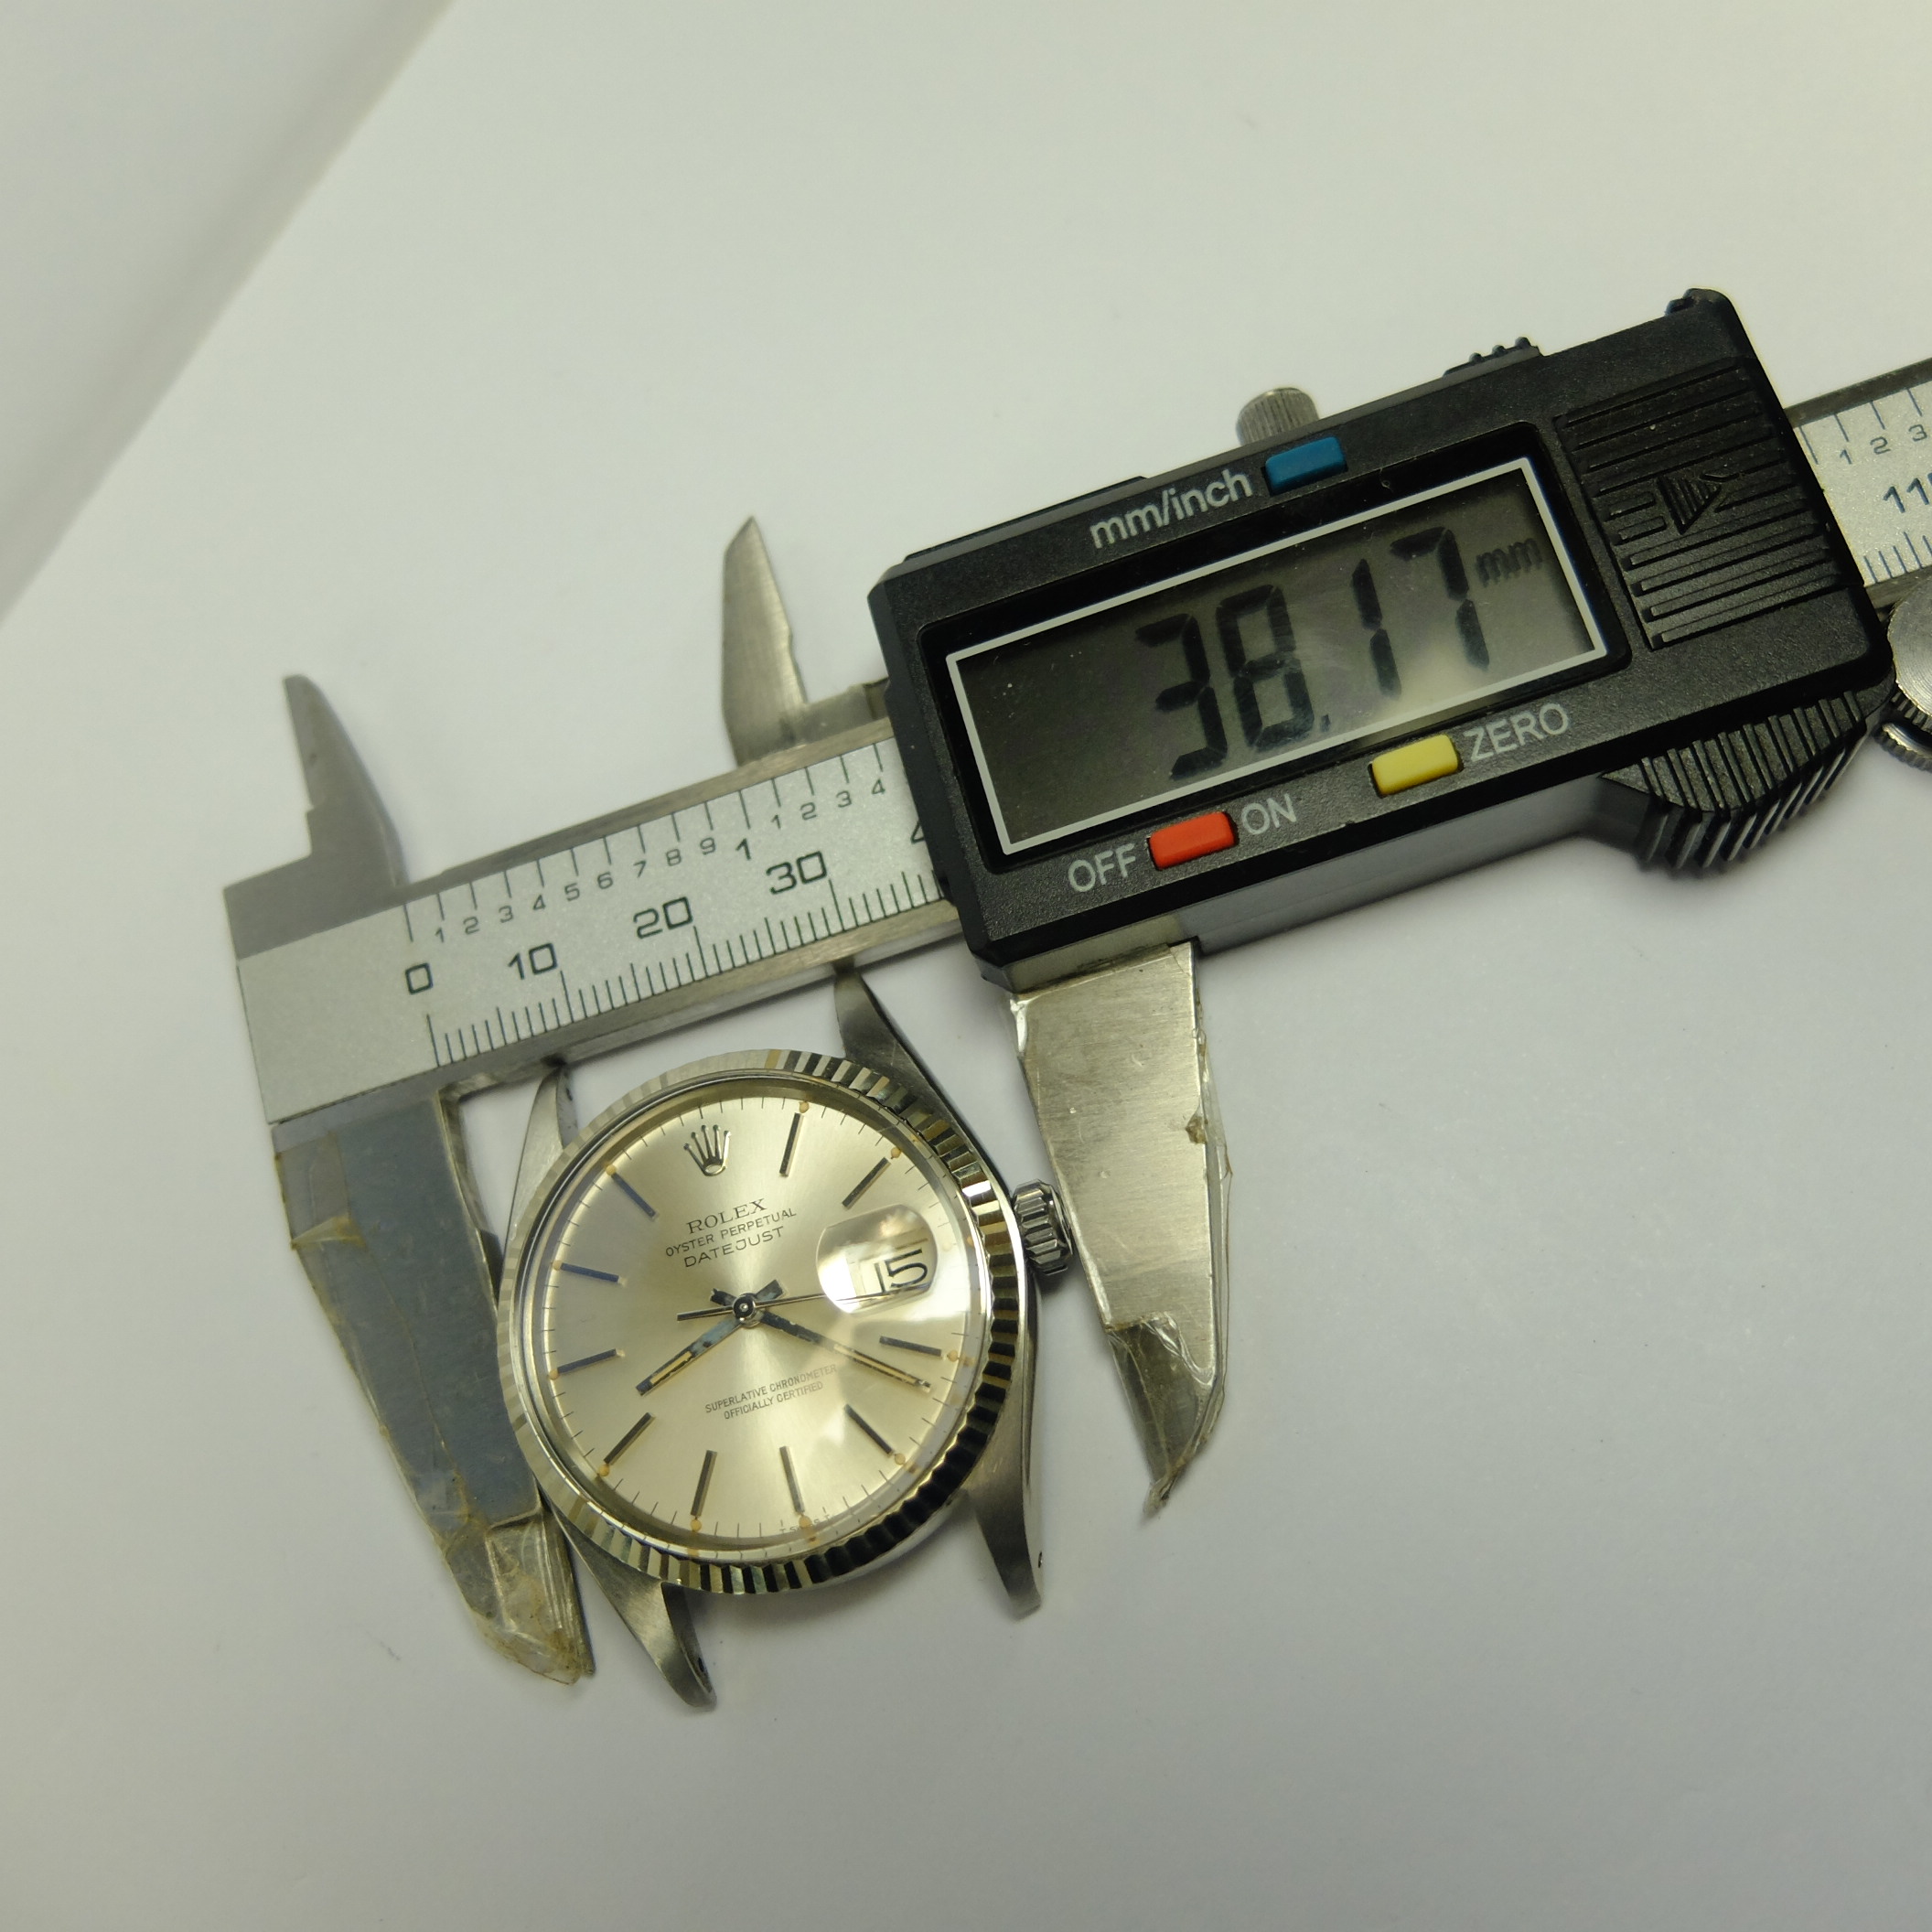 electronic ruler measuring the diameter of a rolex 16014, 38mm, more information